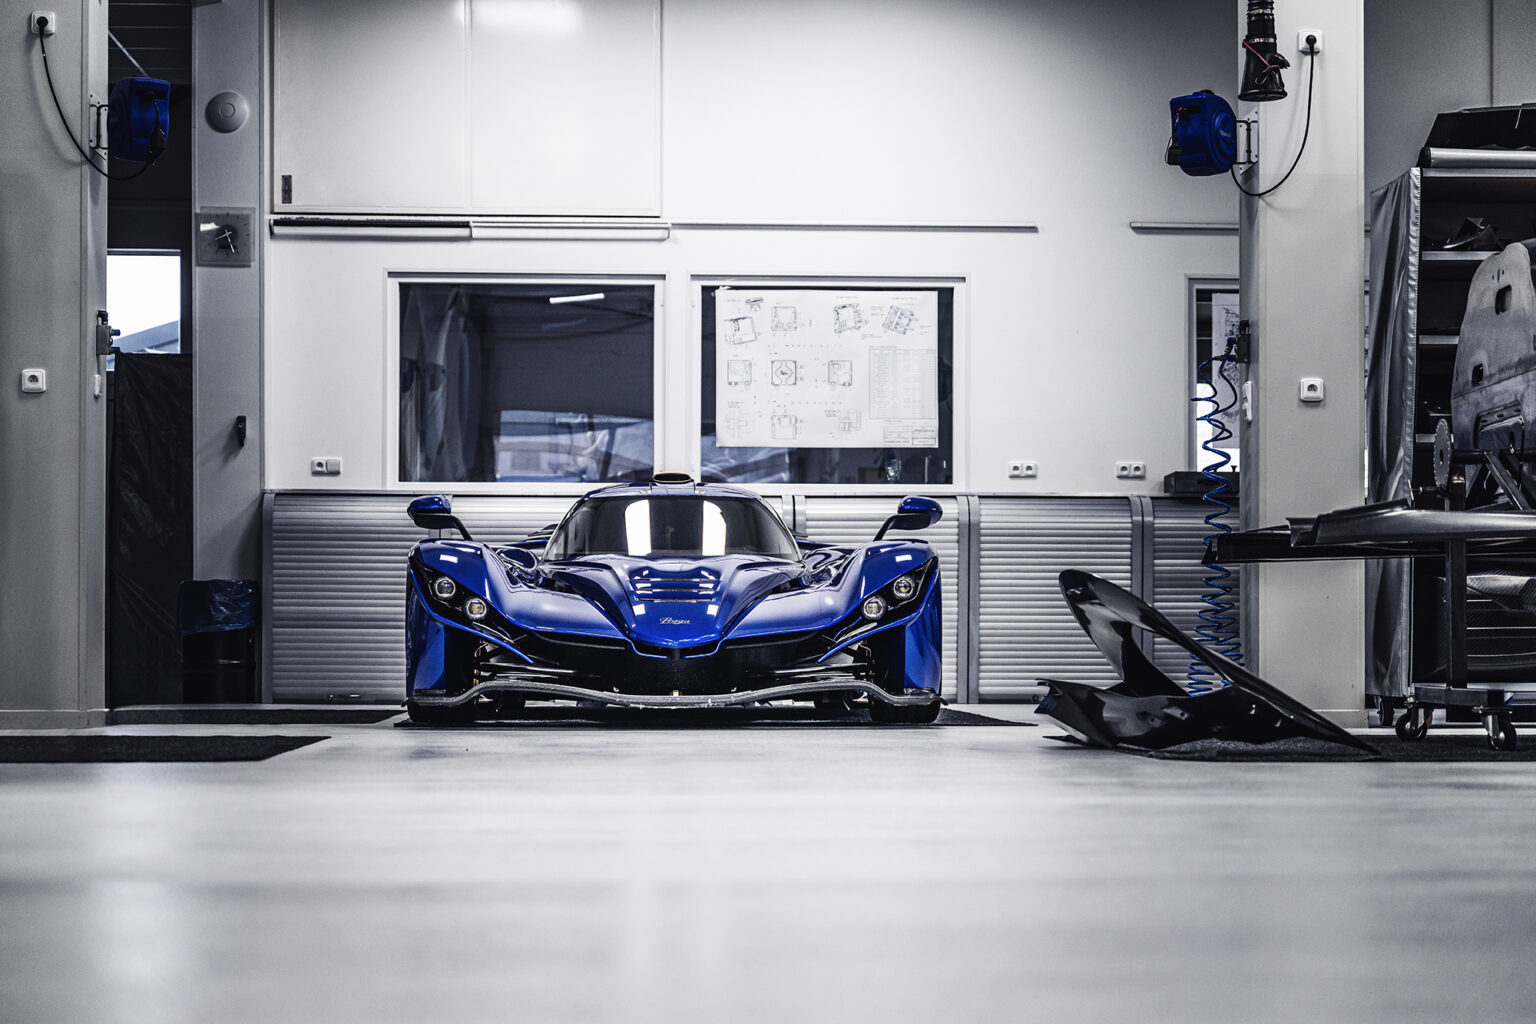 Praga's street-legal hypercar is now in production